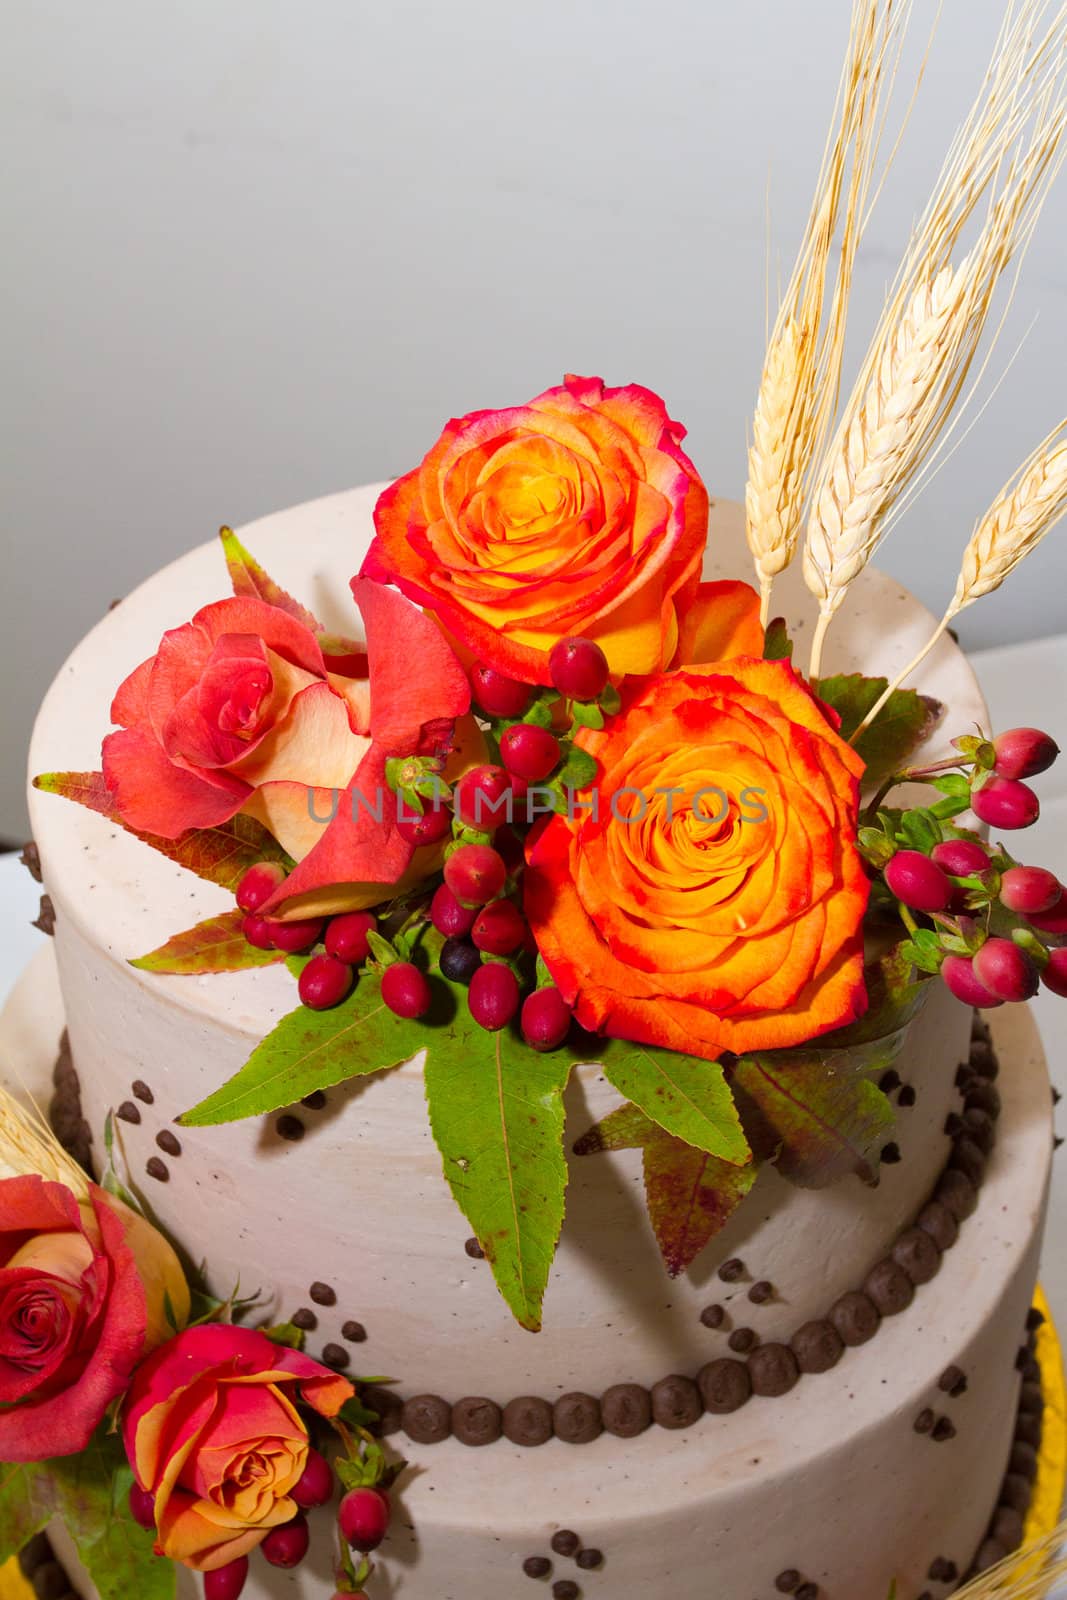 Orange flowers top this traditional white wedding cake along with wheat and harvest items.